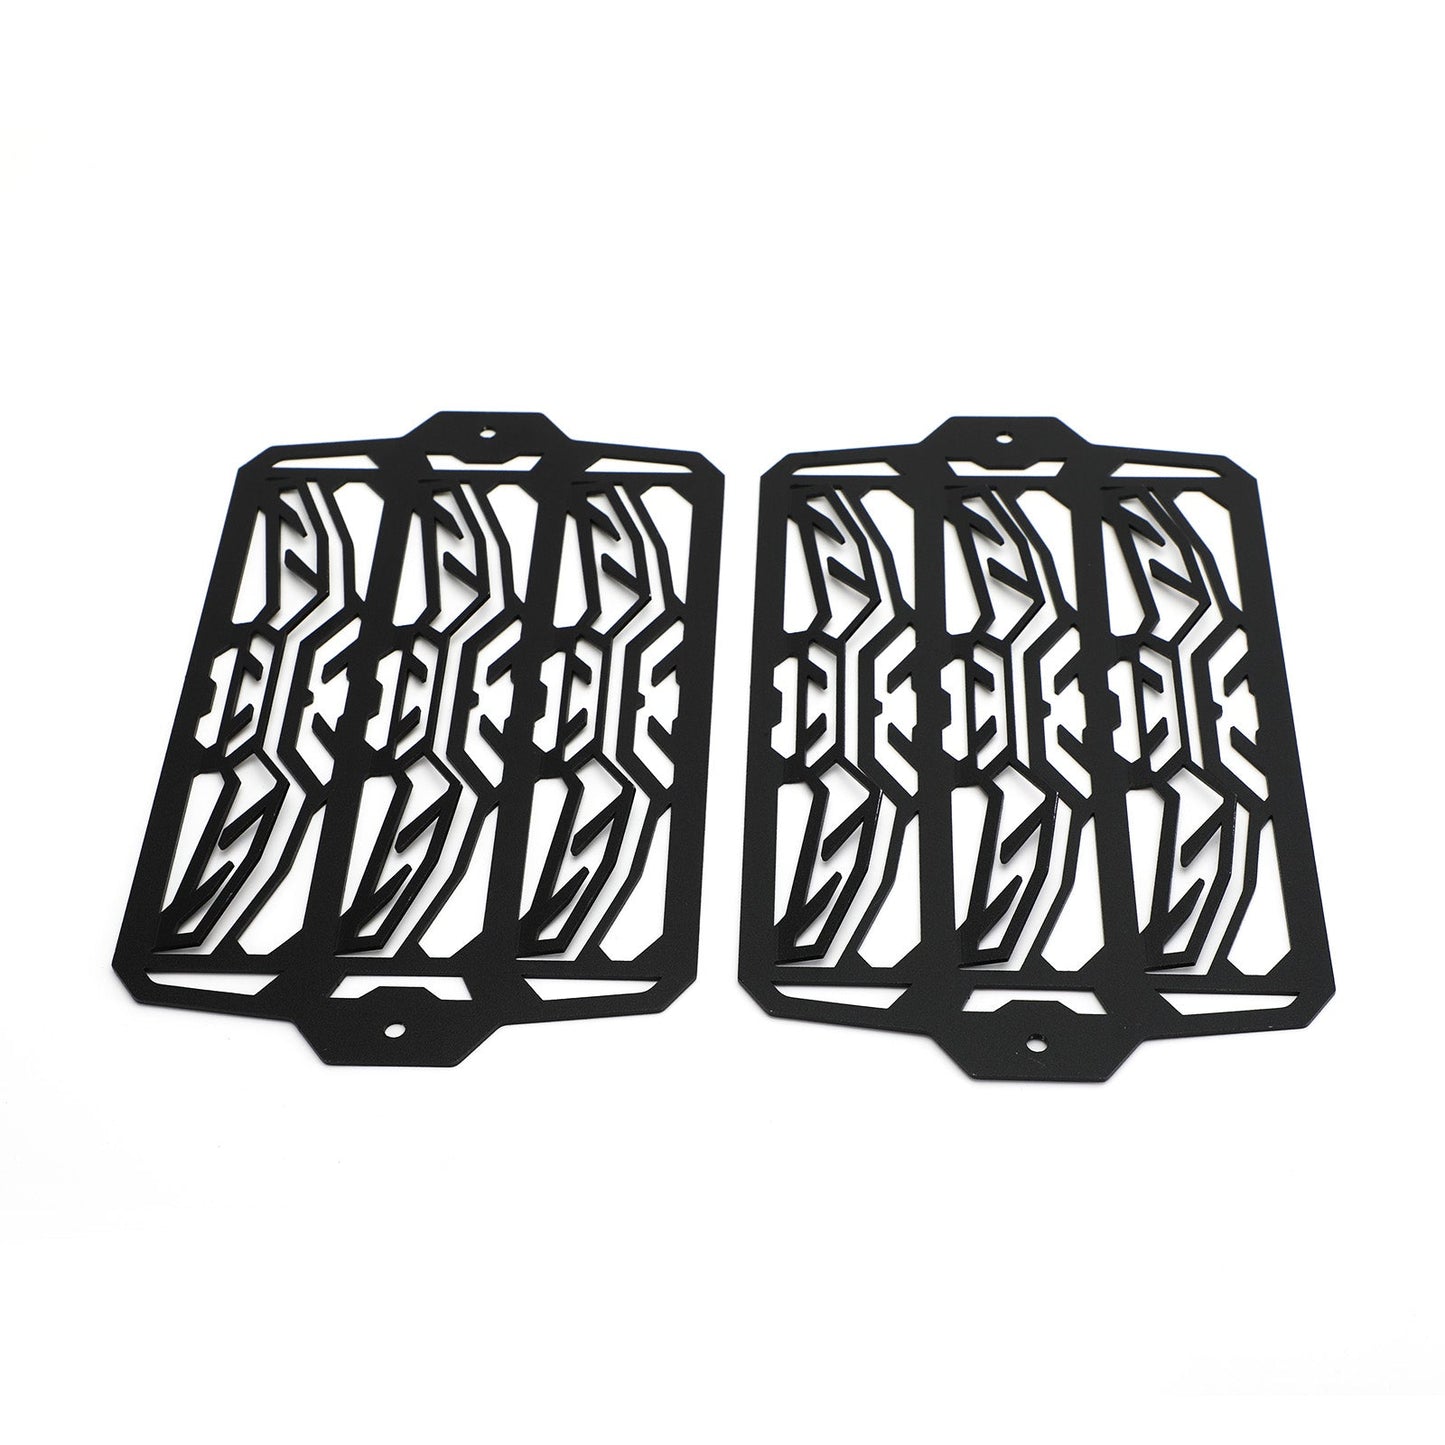 Black Radiator Guard Cover Protector Fit for Triumph Tiger 900 /Rally /GT 2020+